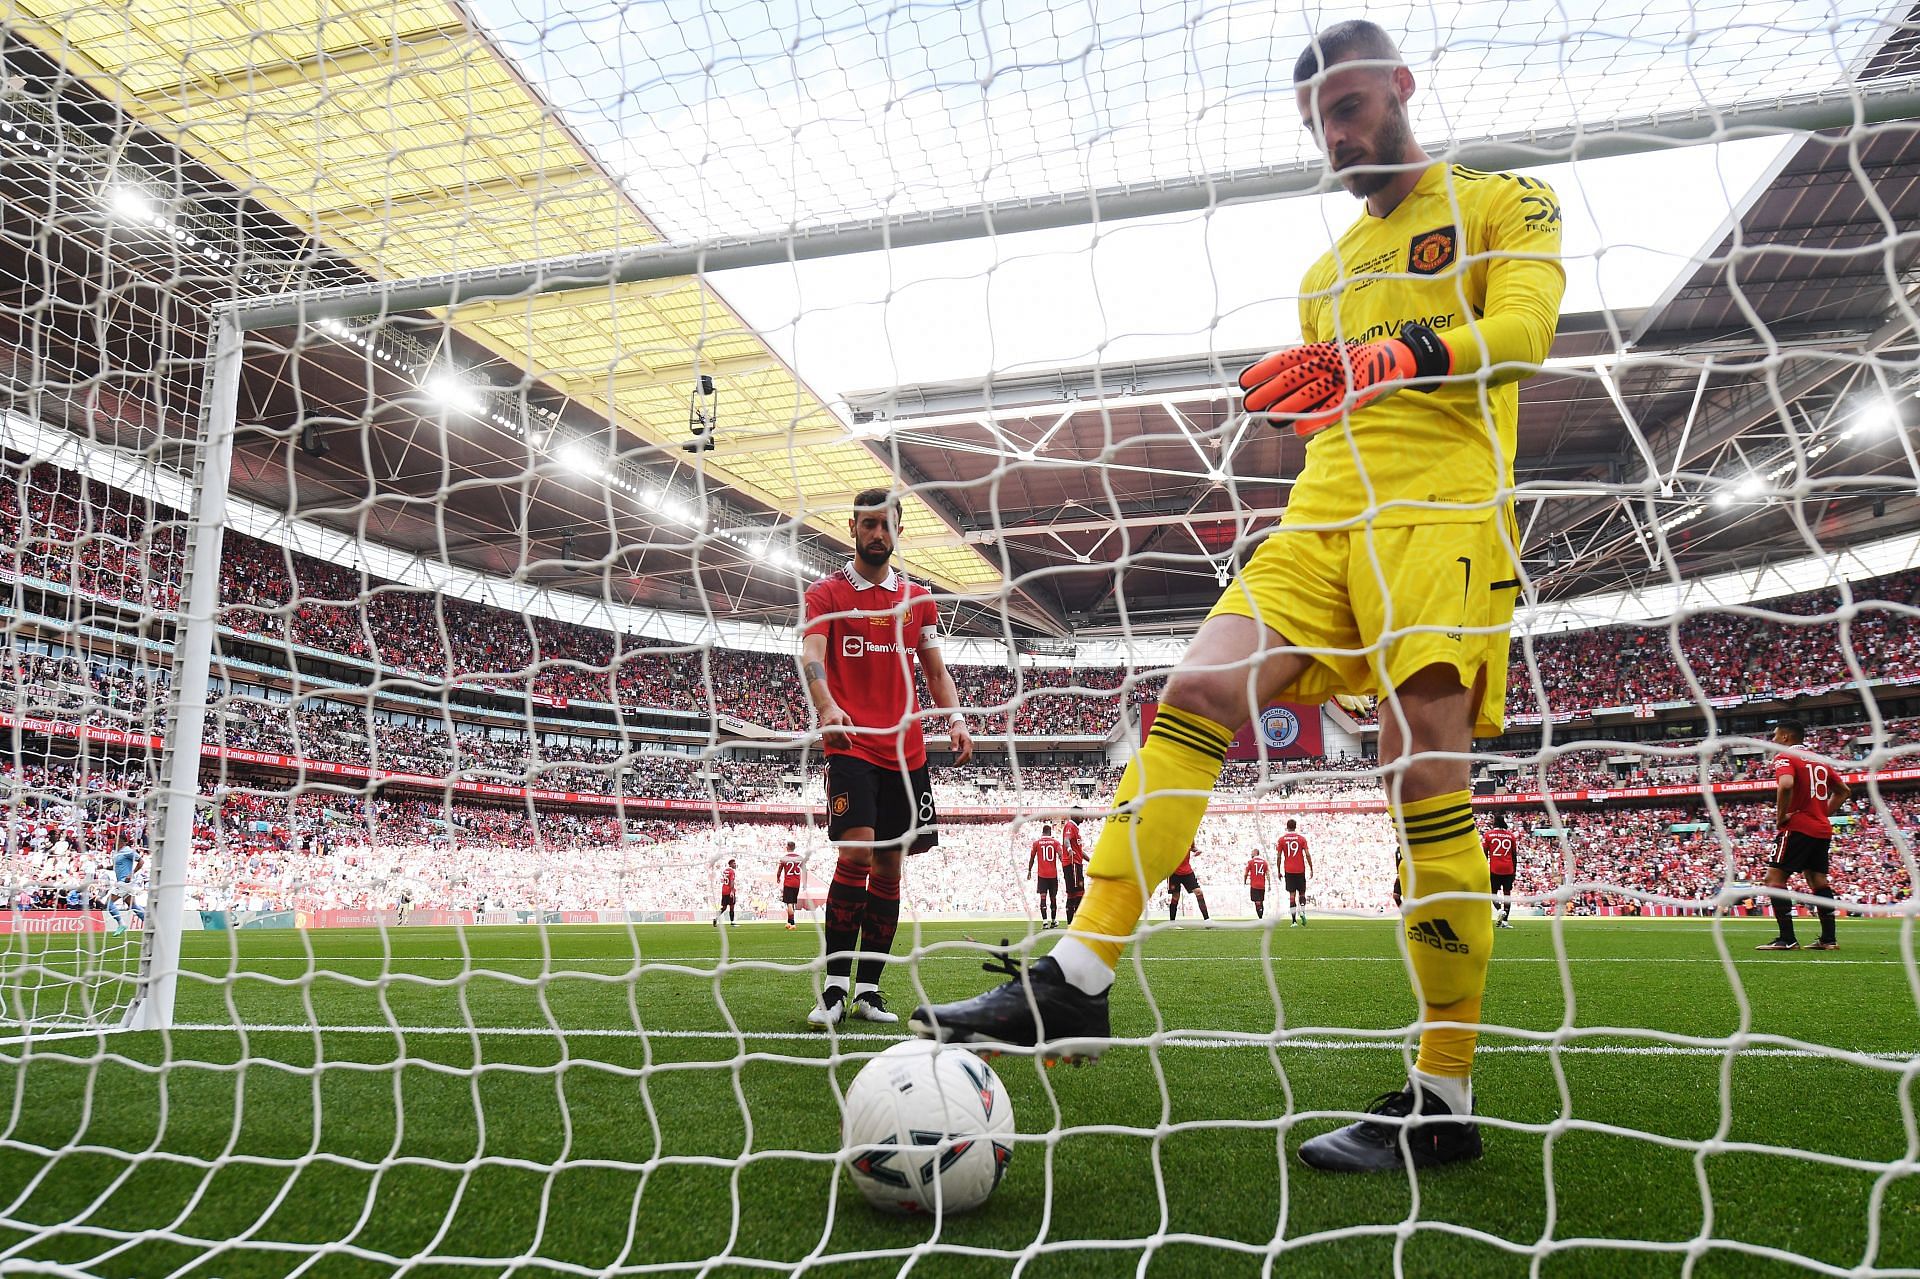 Manchester United goalkeeper David de Gea picks the ball out of the back of the net after conceding.